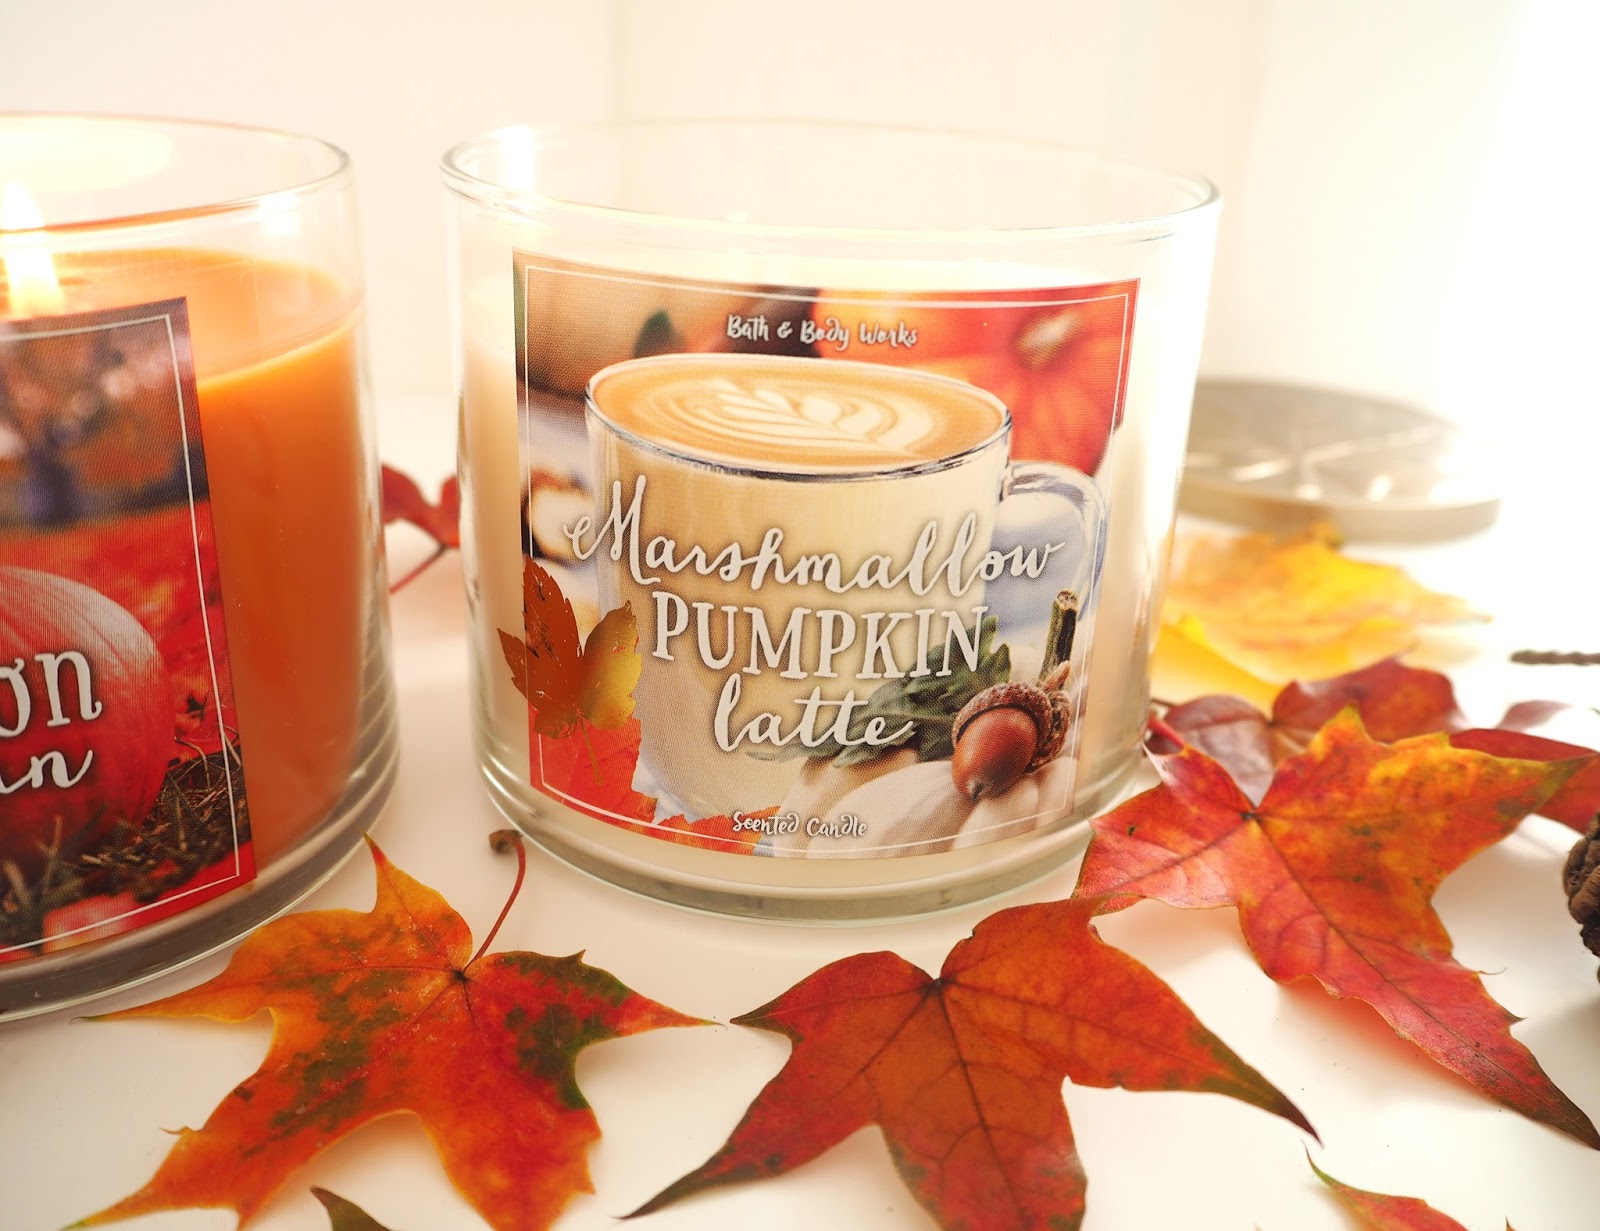 Candles I'm Burning This Autumn, Katie Kirk Loves, Yankee Candles, Bath & Bodyworks Candles, Flamingo Candles, Autumn Candles, Pumpkin Candles, Autumn Decor